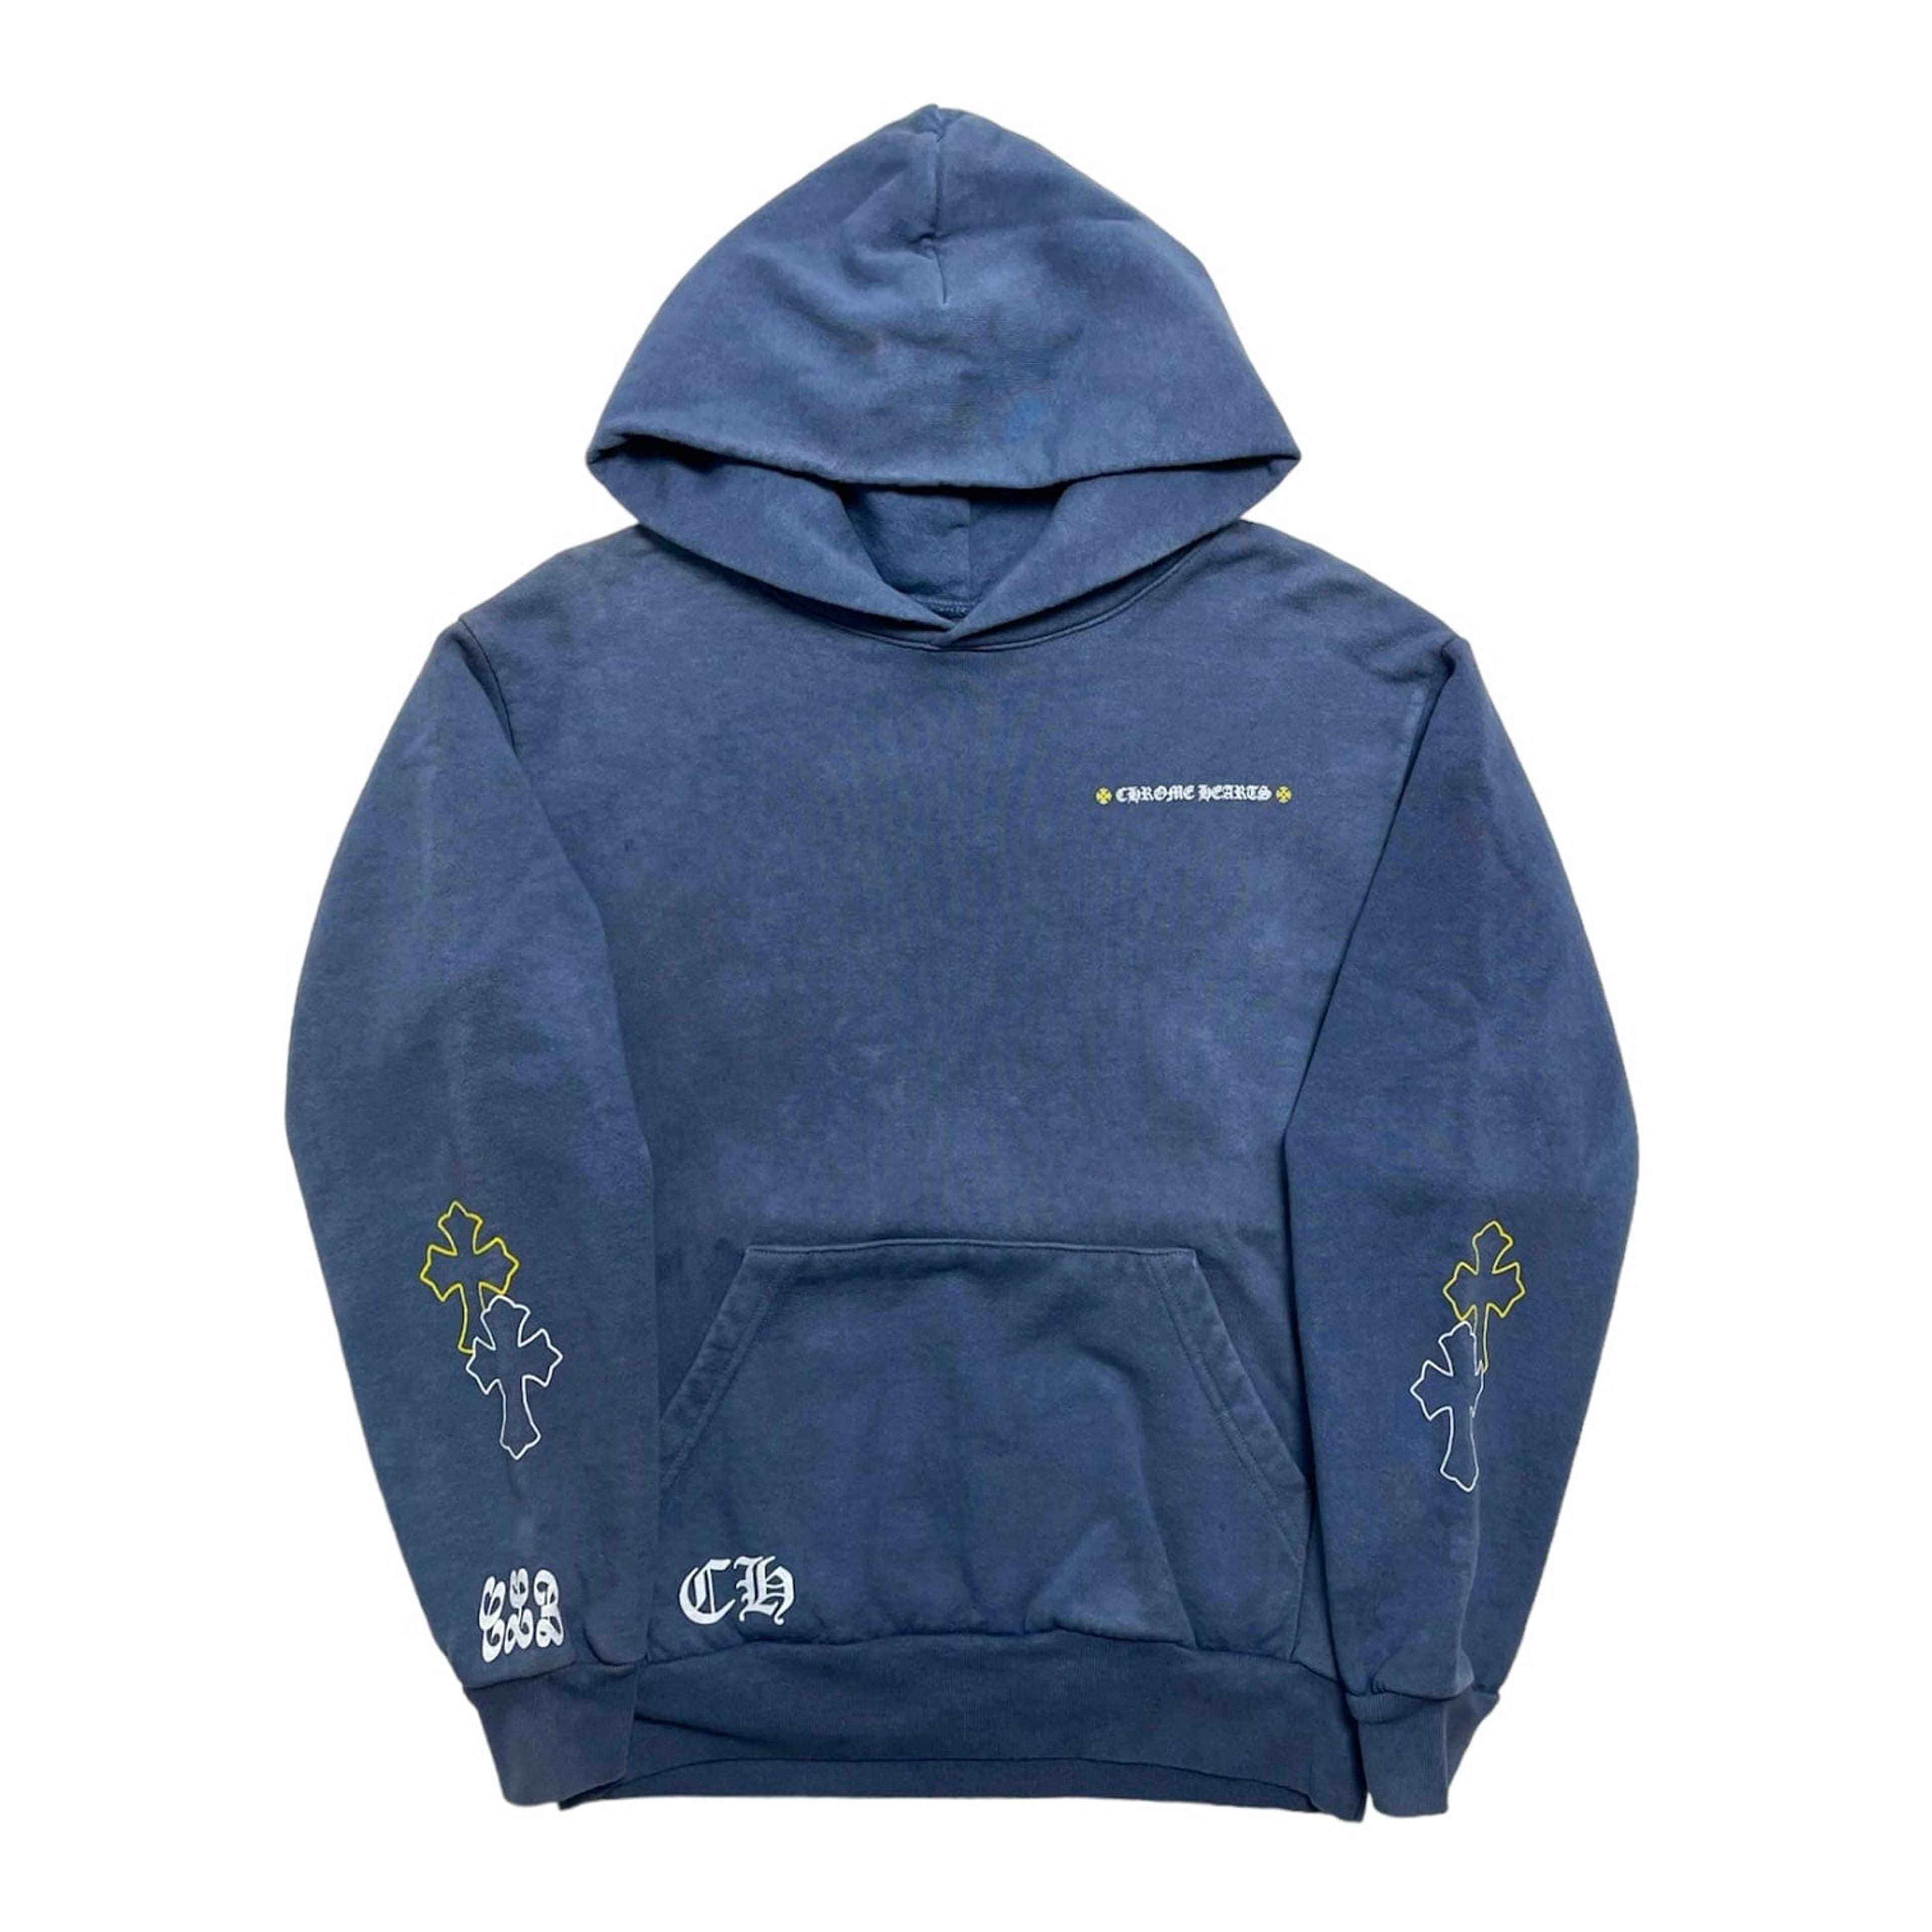 Chrome Hearts x Drake Certified Lover Boy Hand Dyed Hooded Sweat